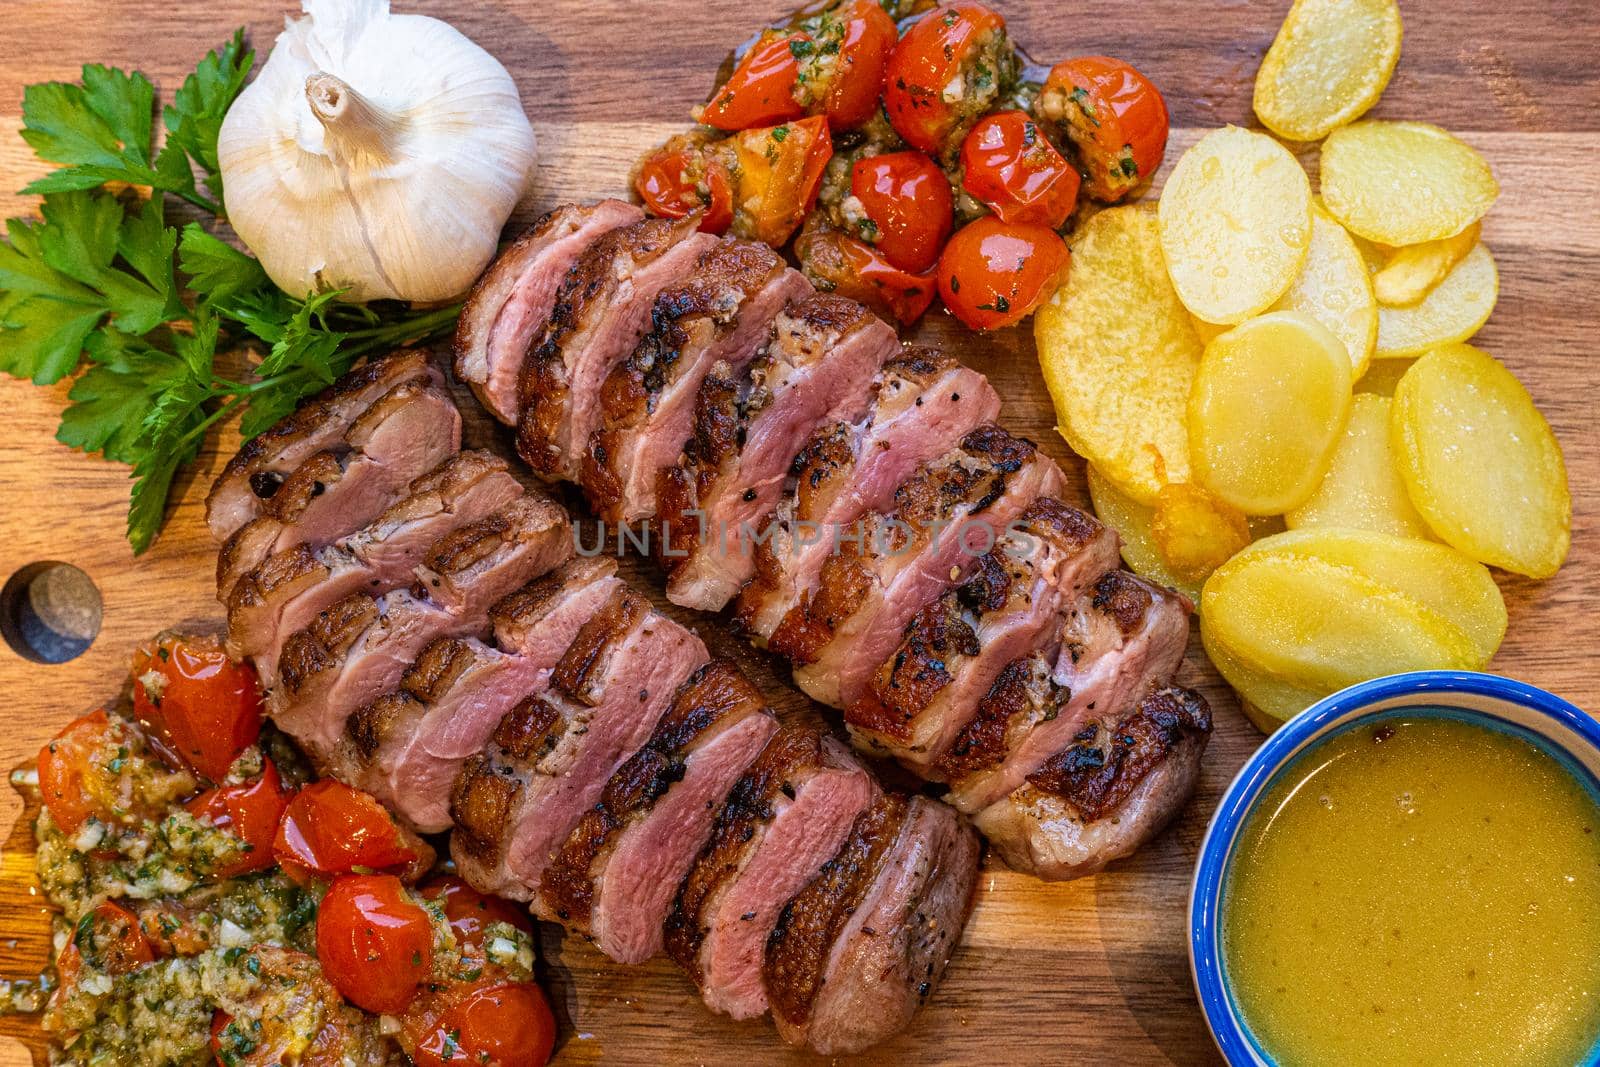 Grilled duck breast with juniper berries and a tomato persillade from the barbecue